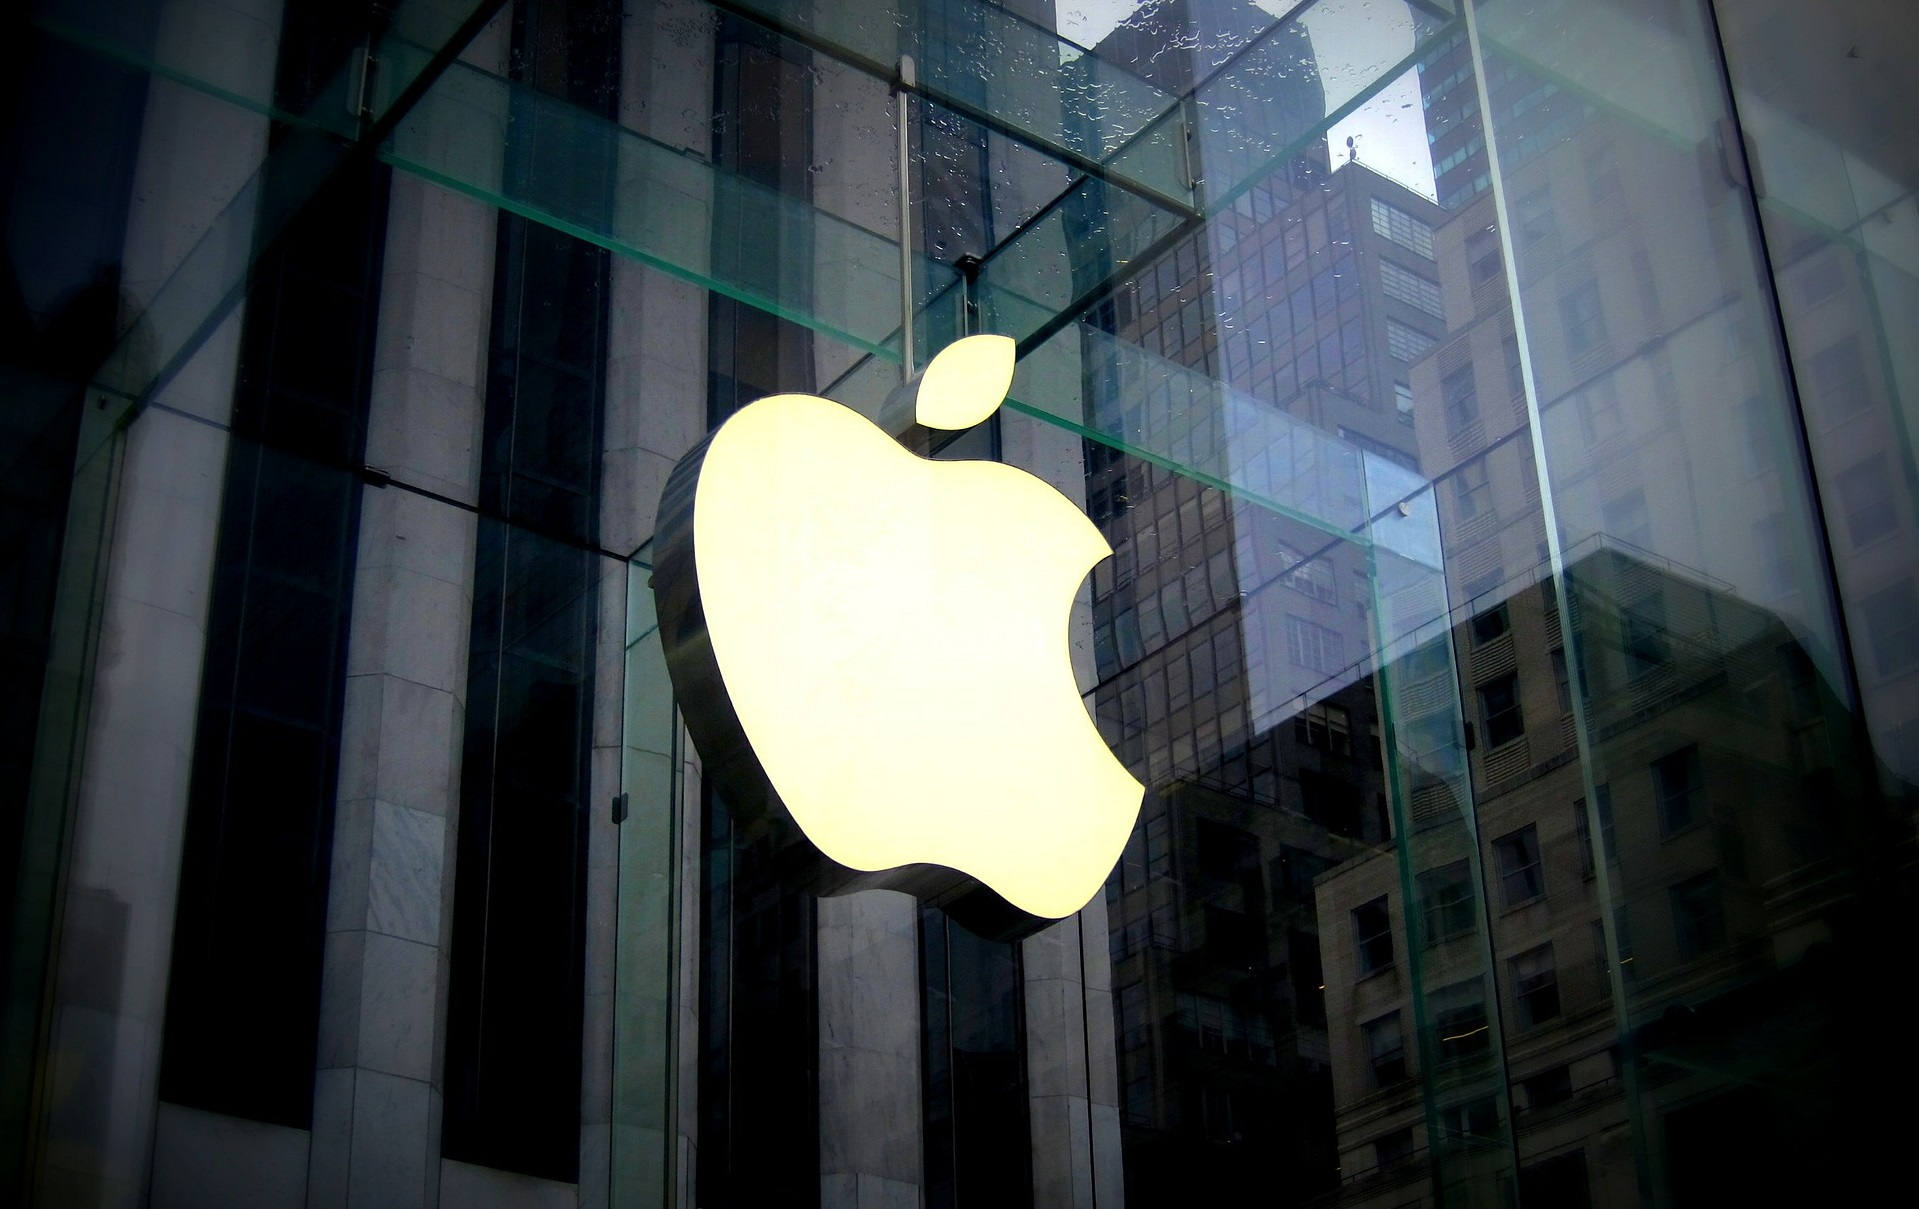 StudySection Blog About Brief History of Apple Inc.